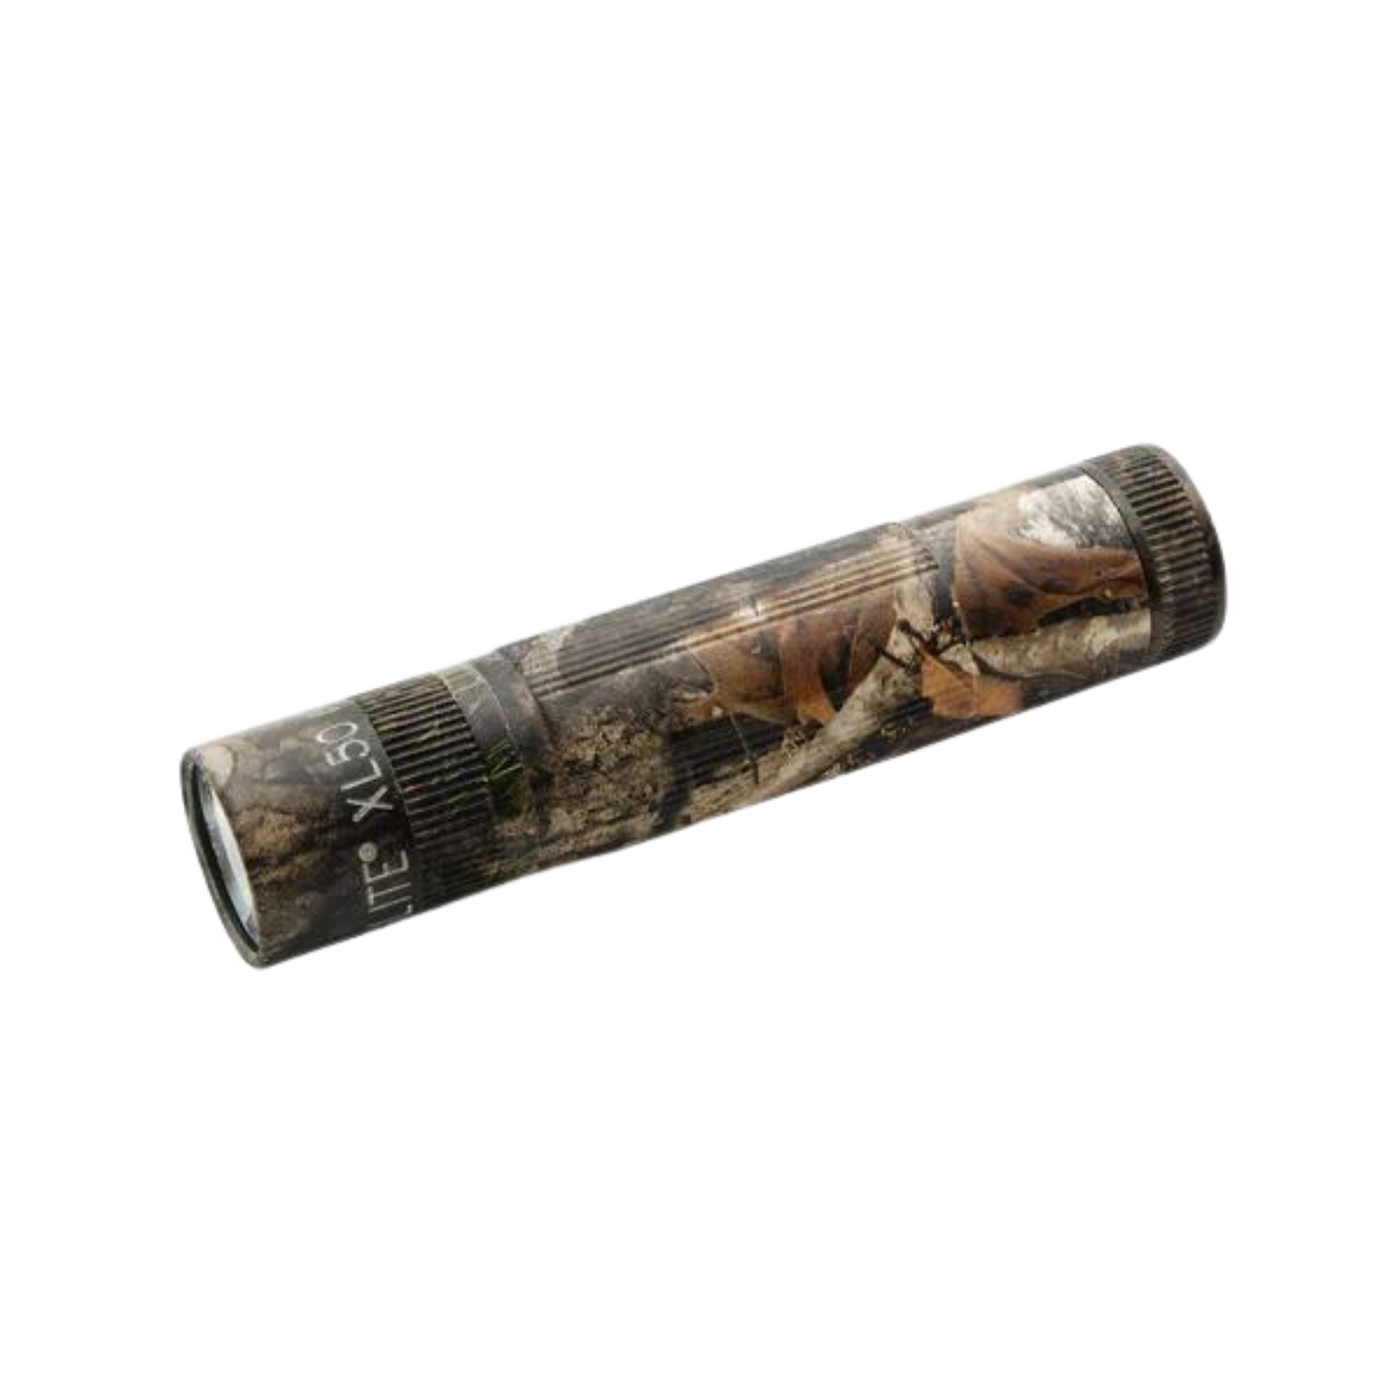 Maglite XL50 LED Pocket Flashlight with Mossy Oak Country DNA Pattern